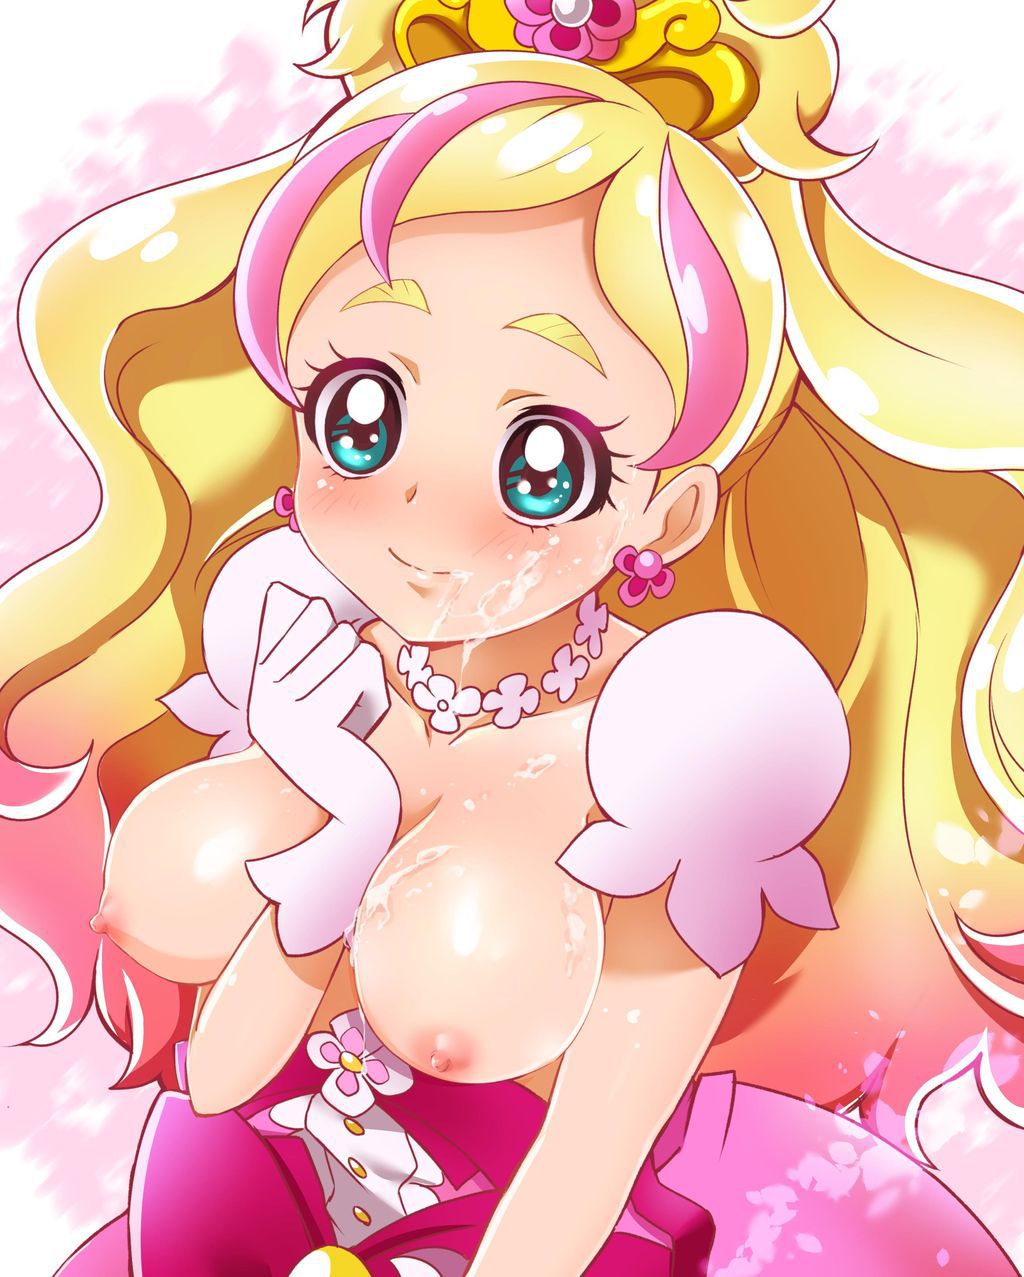 GO! erotic images of their Princess pricy a cure please!! 11